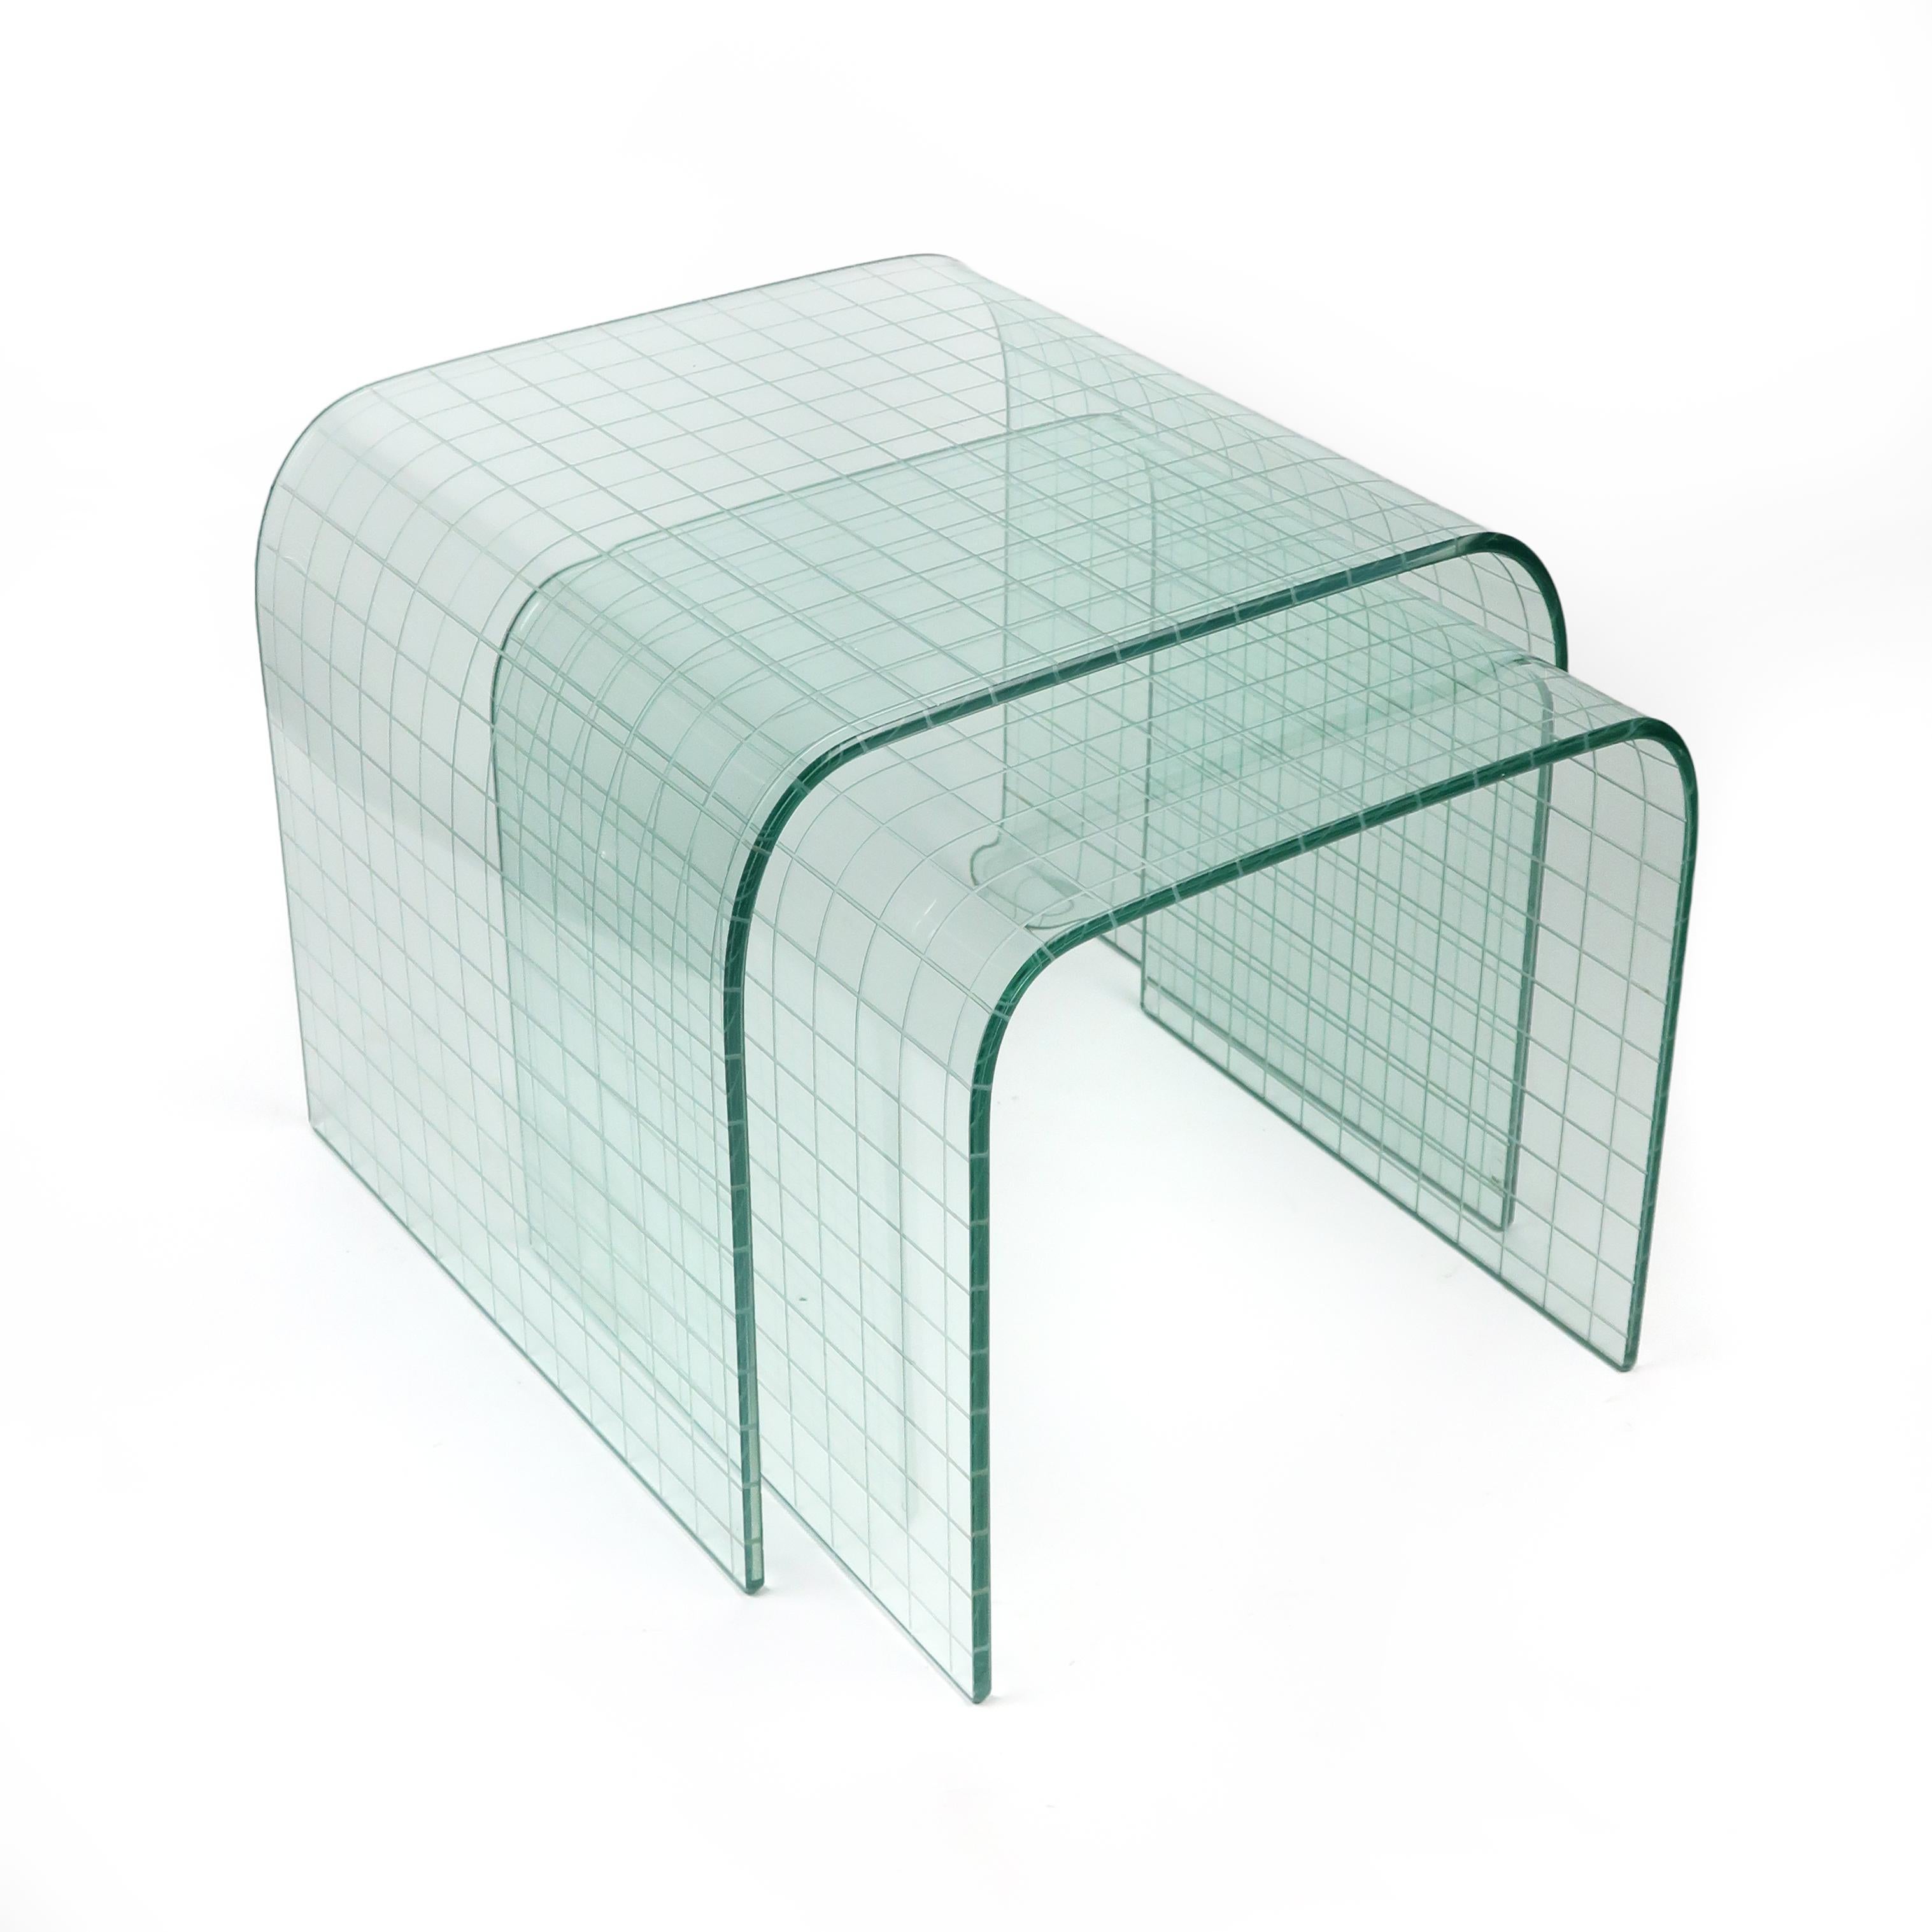 A beautiful 1970s pair of glass waterfall side or nesting tables designed by Italian designer and architect Angelo Cortesi for FIAM of Italy. Each table has an etched grid pattern on its underside and larger one retains original 